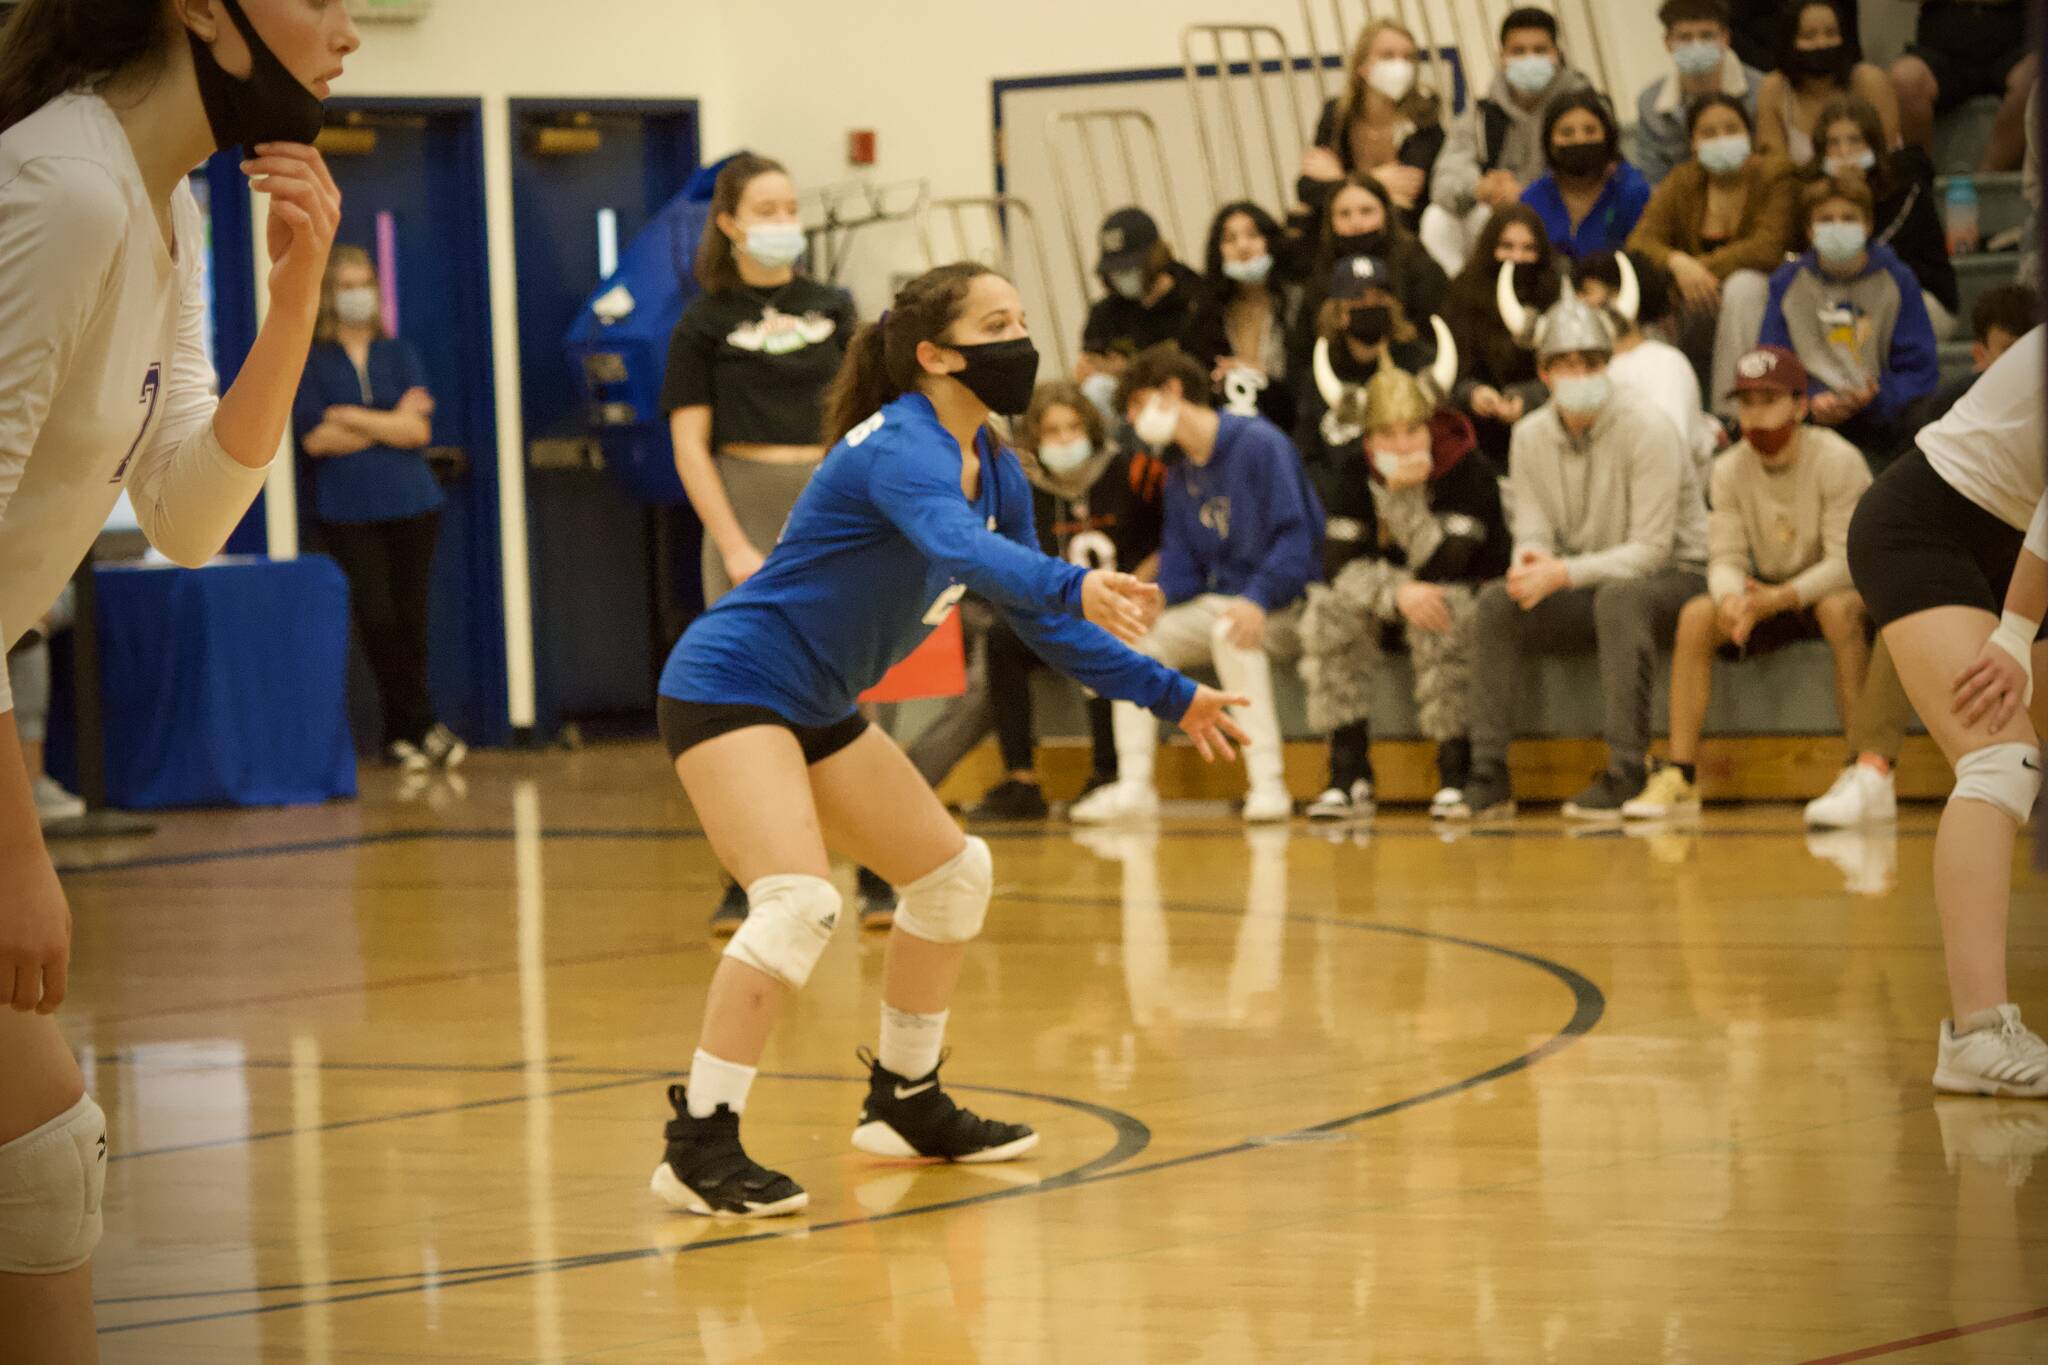 Corey Wiscomb photo
Always ready for the dig, sophomore libero Milana Schneider focuses in.